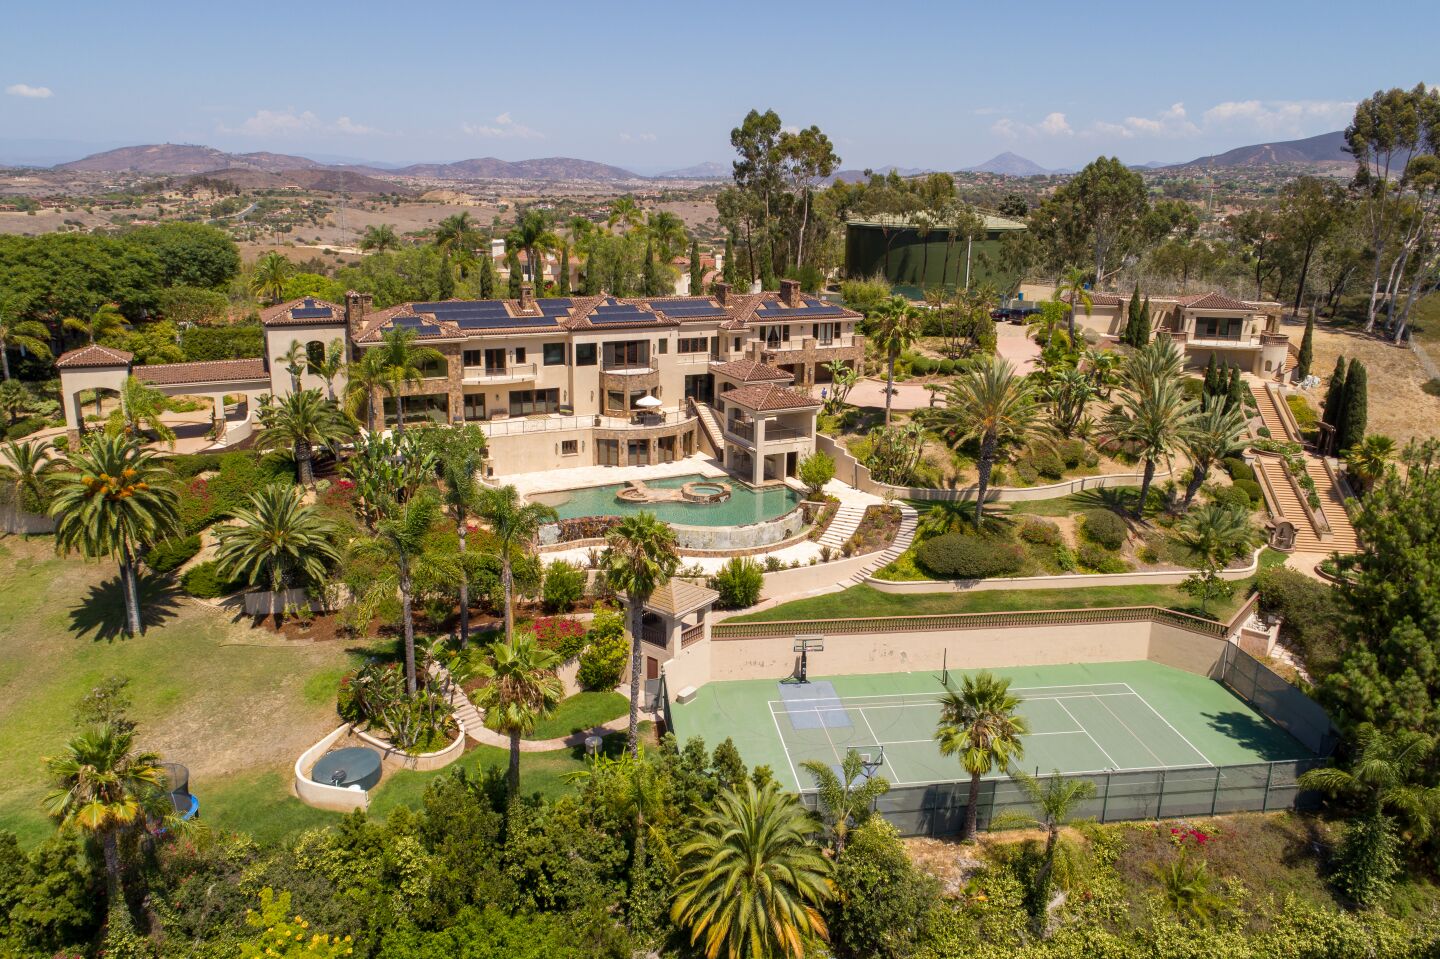 17261 Circa Oriente is for sale for $8.65 million.